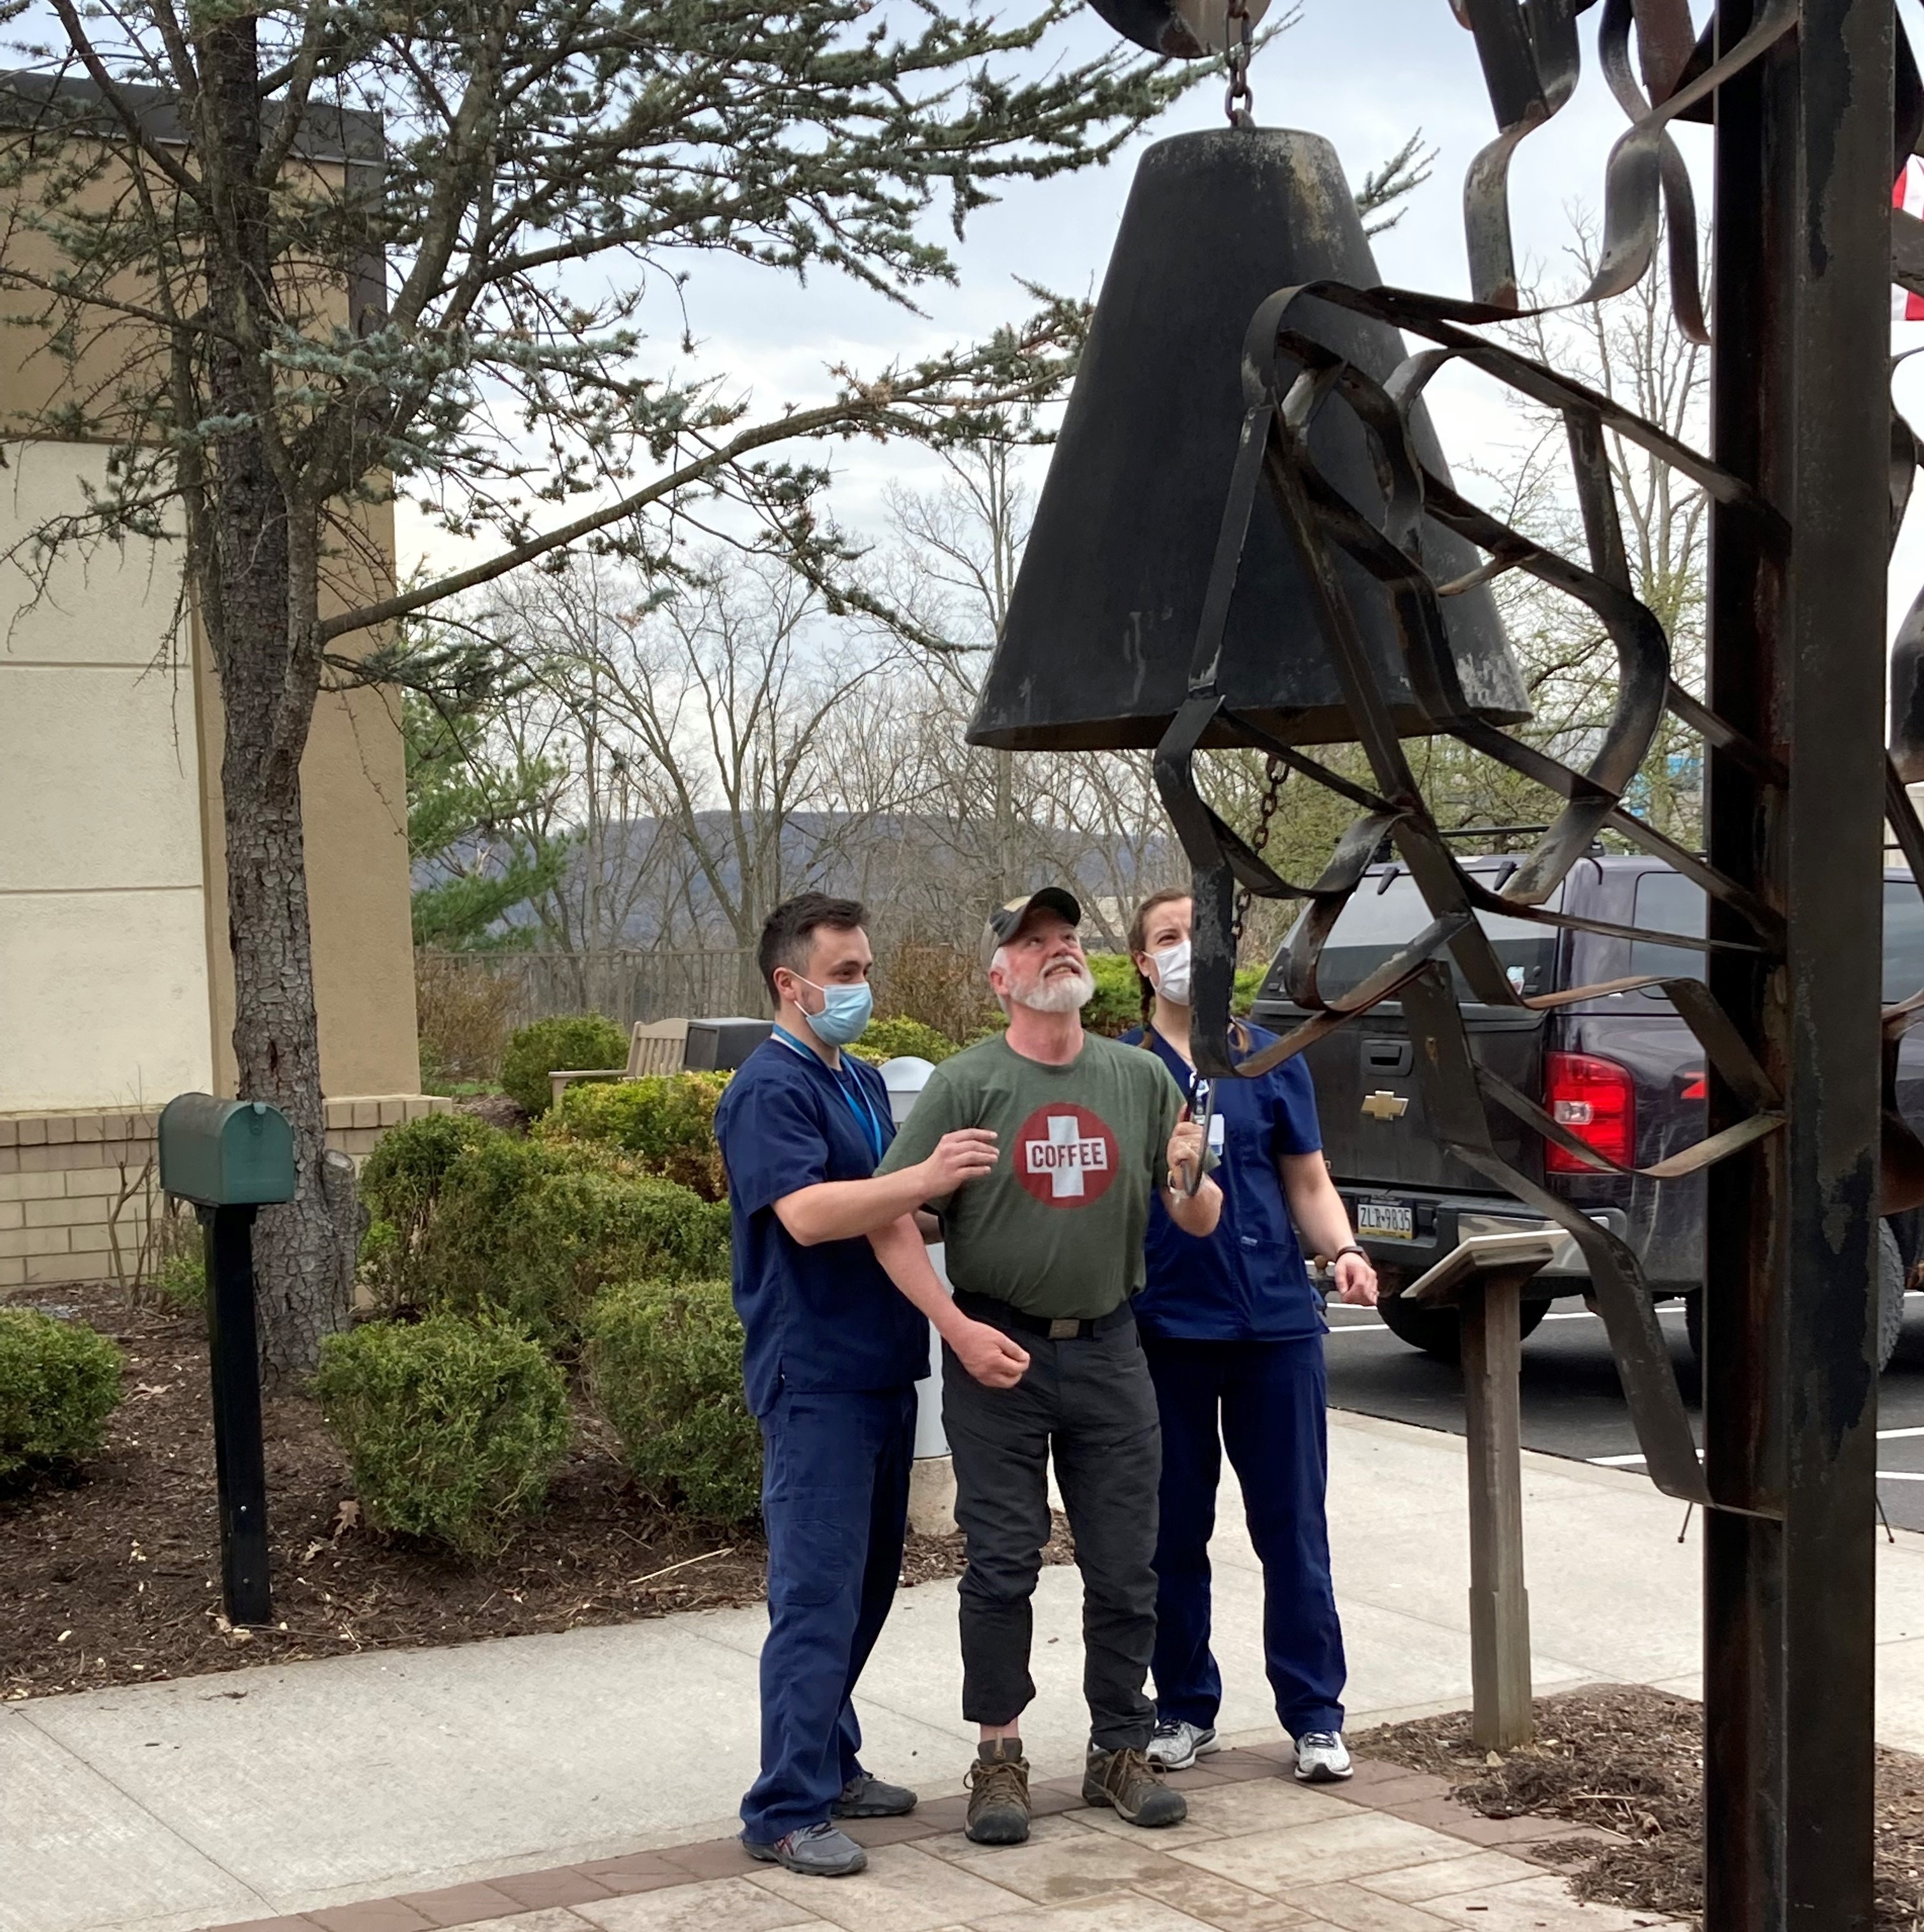 Tony rings the bell outside Geisinger Encompass Health Rehabilitation Hospital signaling his discharge to return home.